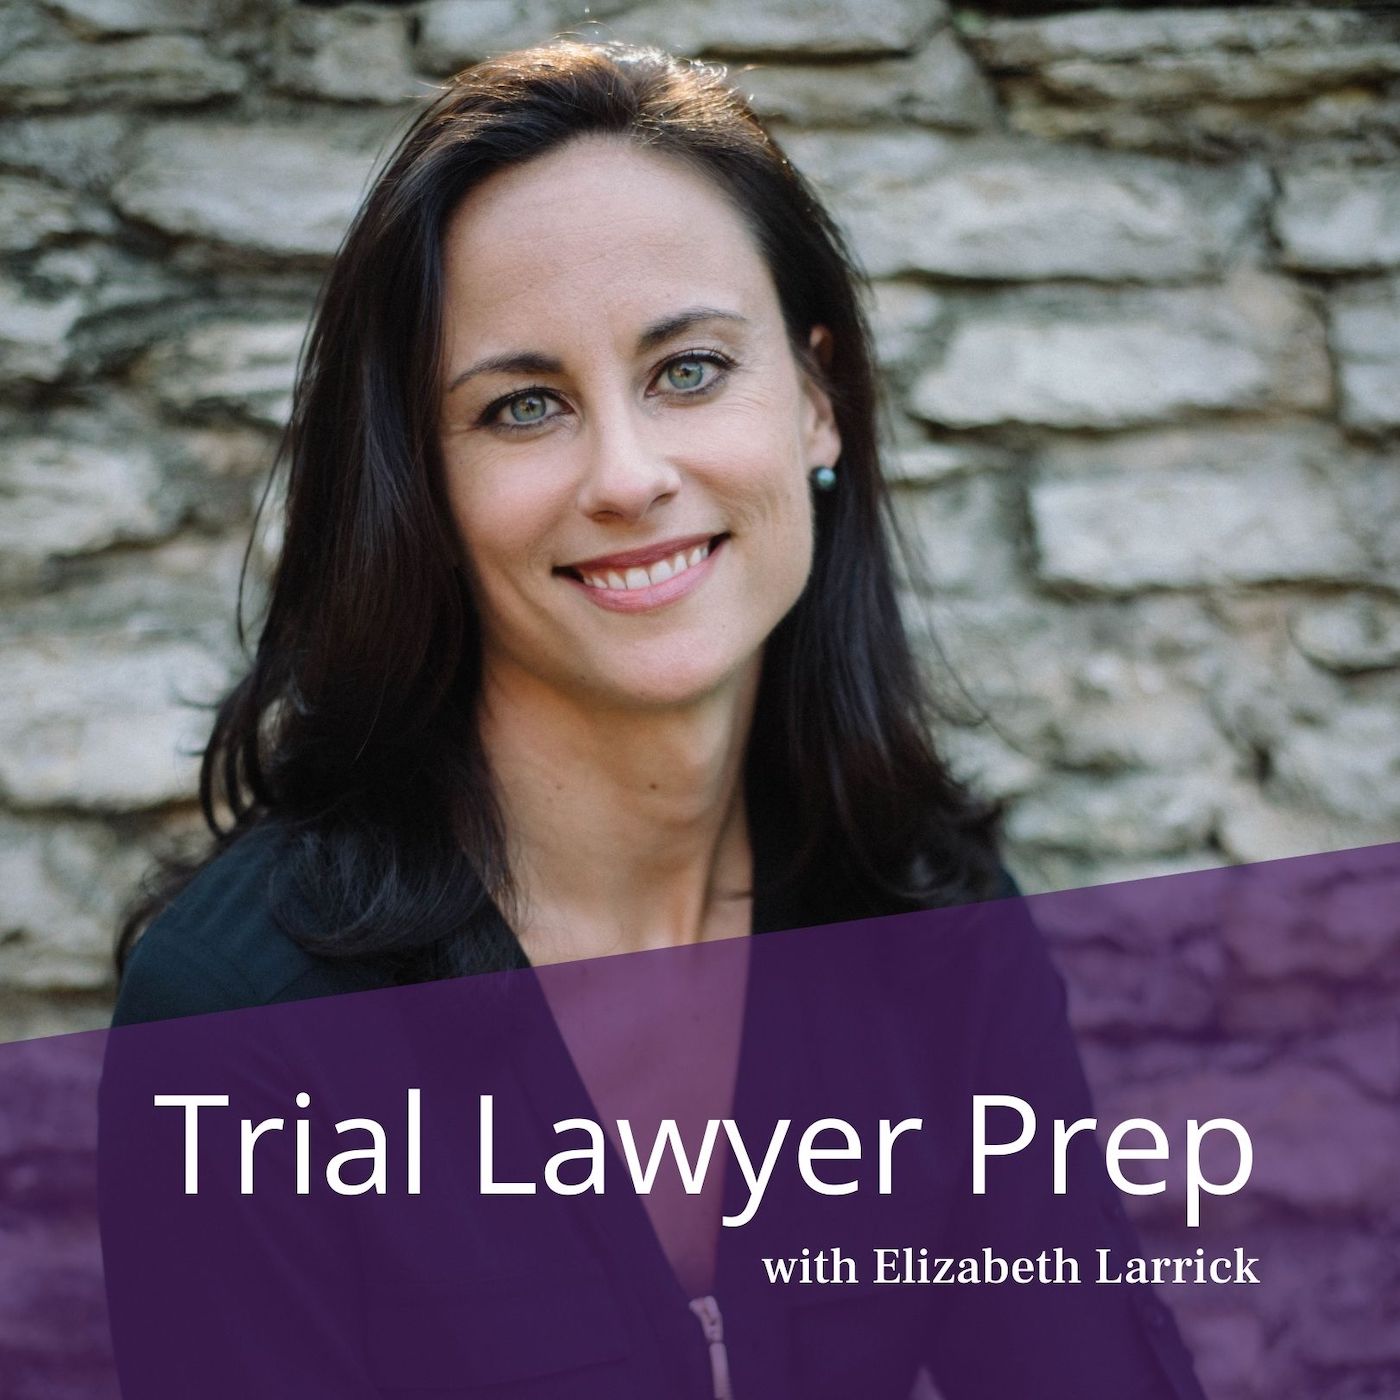 Welcome to Trial Lawyer Prep